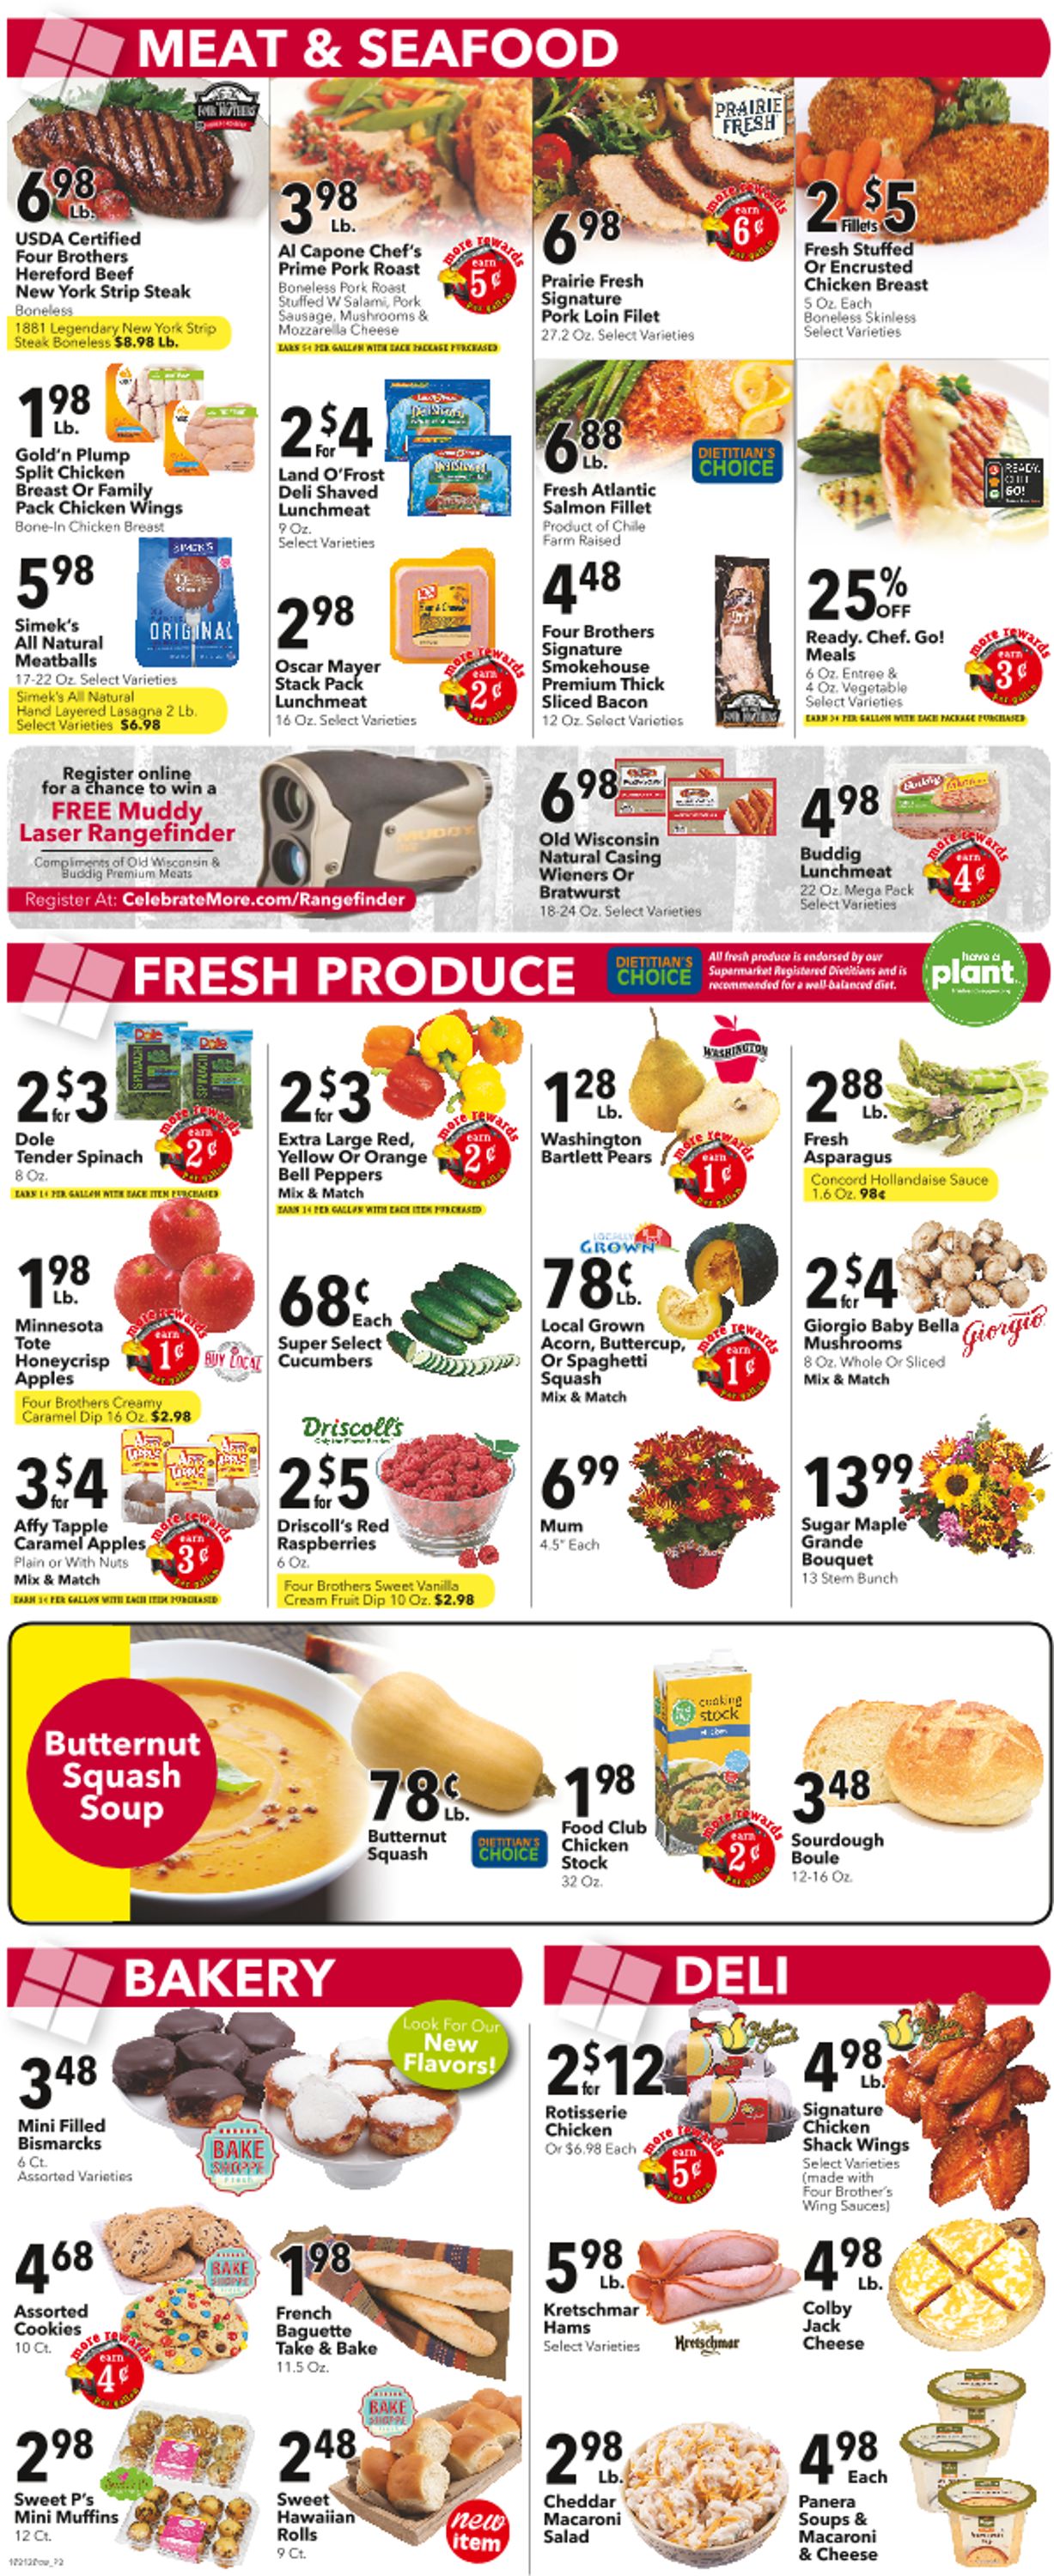 Cash Wise Weekly Ad Circular - valid 10/21-10/27/2020 (Page 2)